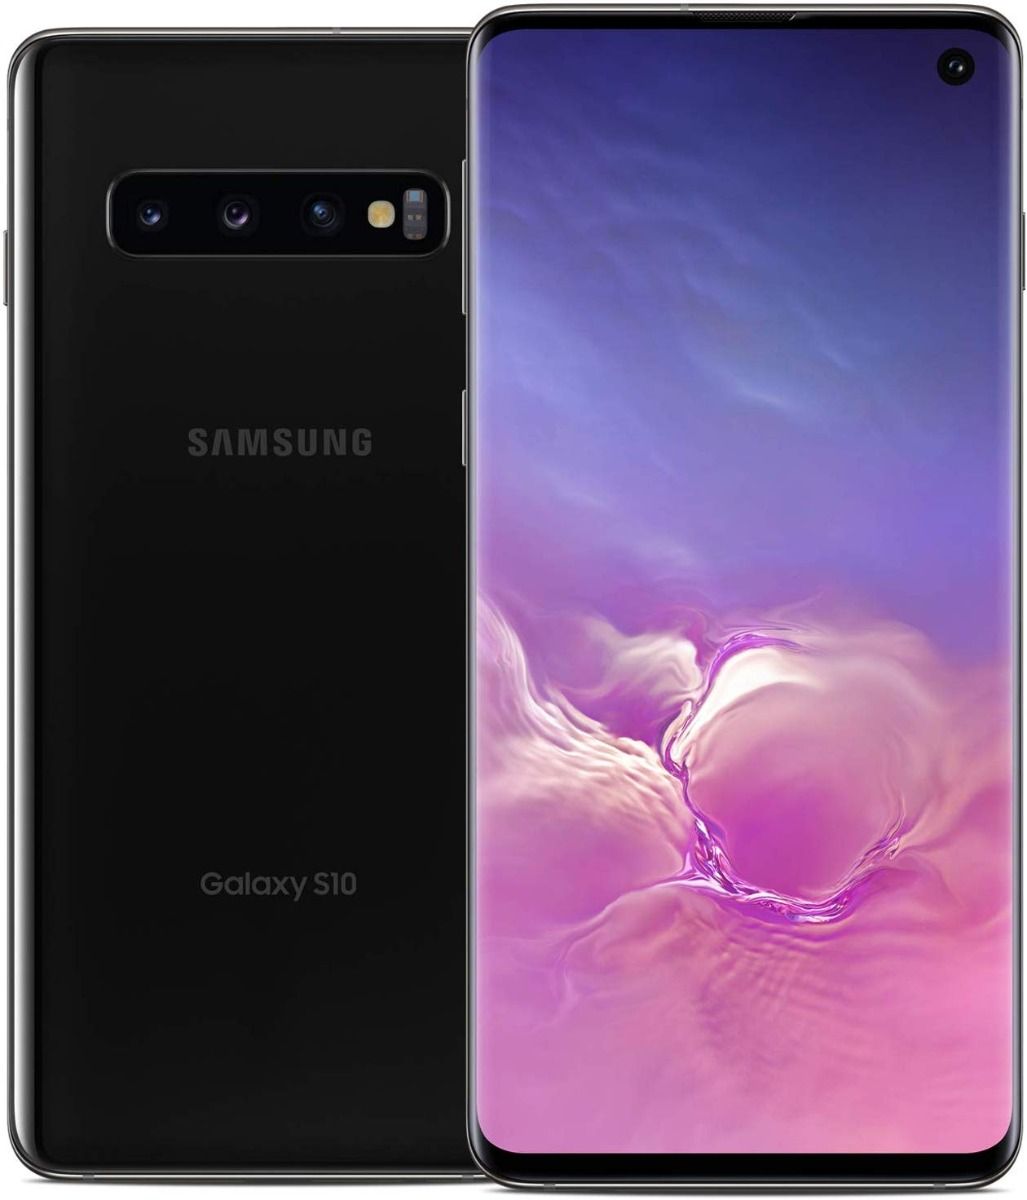 Samsung Galaxy S10 128GB 8GB Prism Black - New Case,Glass Screen Protector& Shipping (Like New)